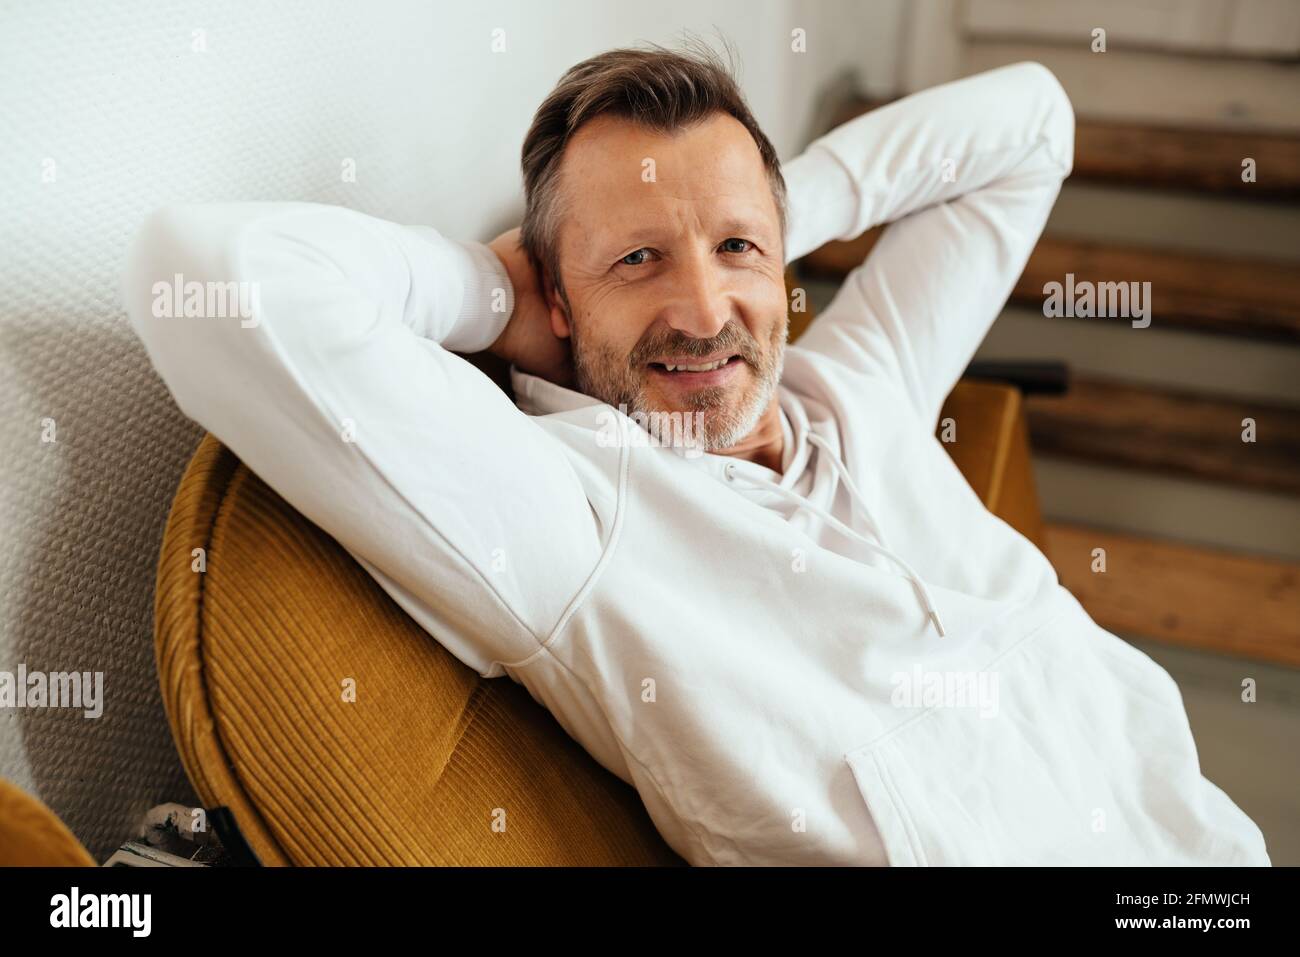 Laid-back man relaxing in a chair with hands behind his head turning to smile quietly at the camera in a close up high angle view Stock Photo